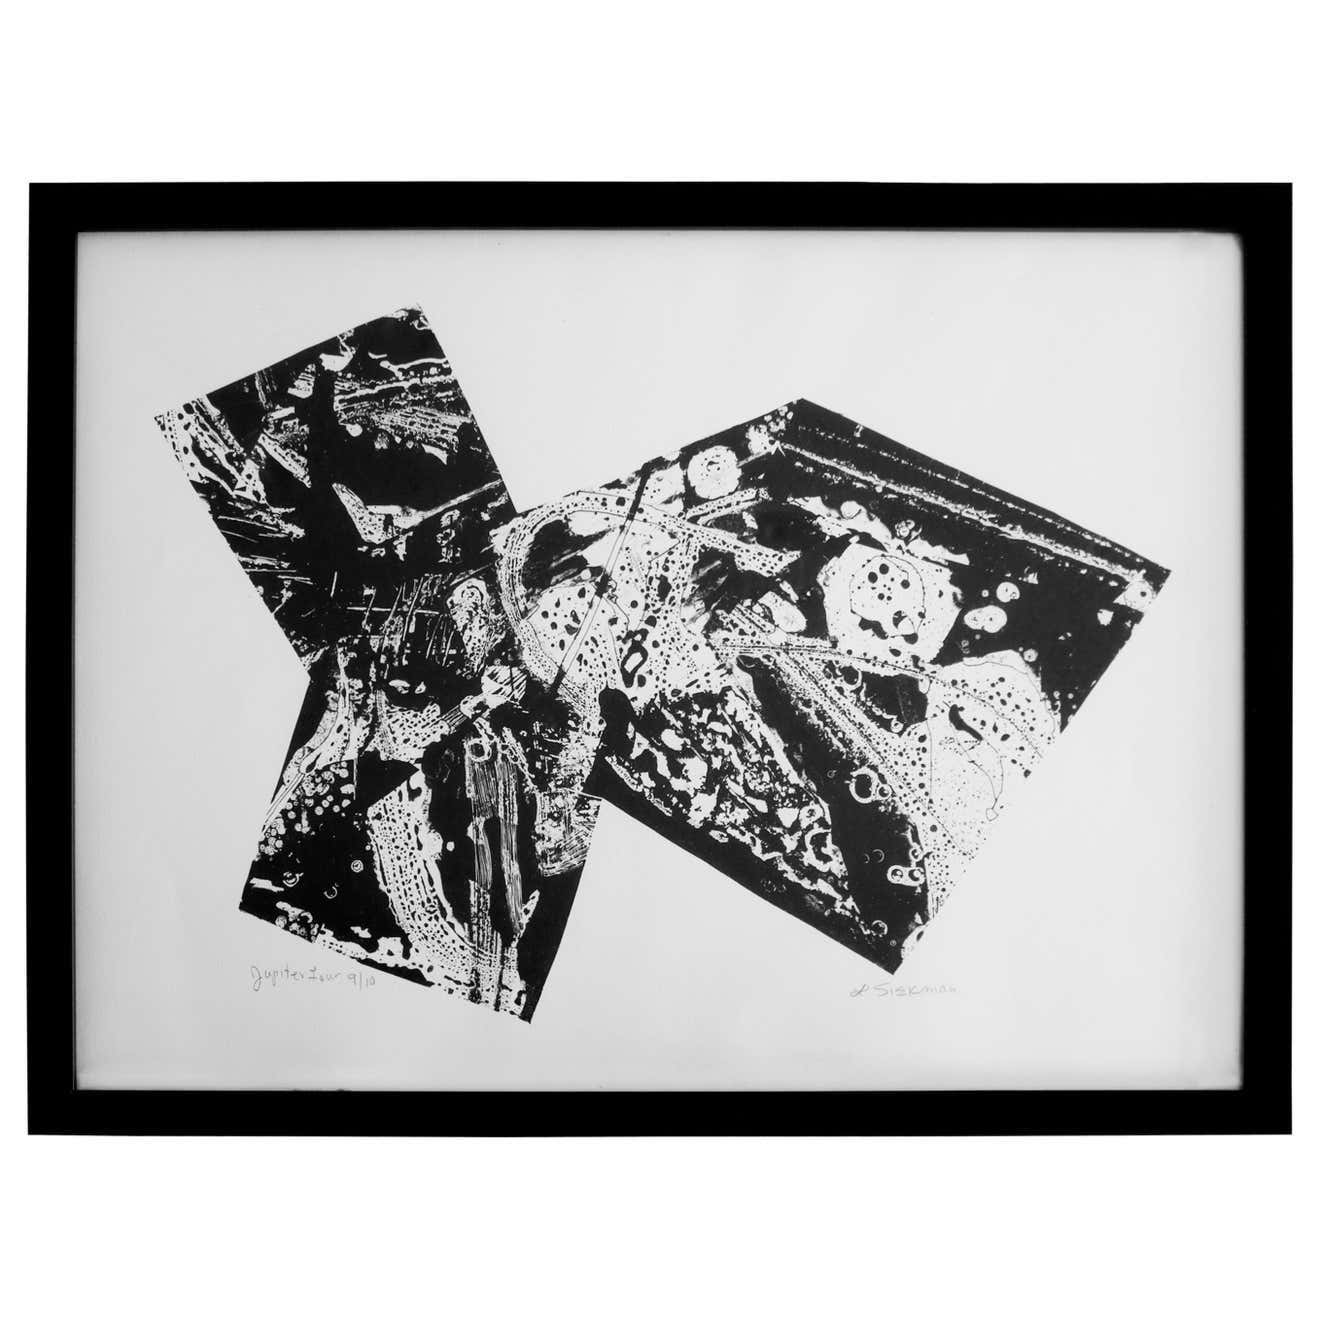 JUPITER FOUR 9/10 Black and White Lithograph by Louise Siekman